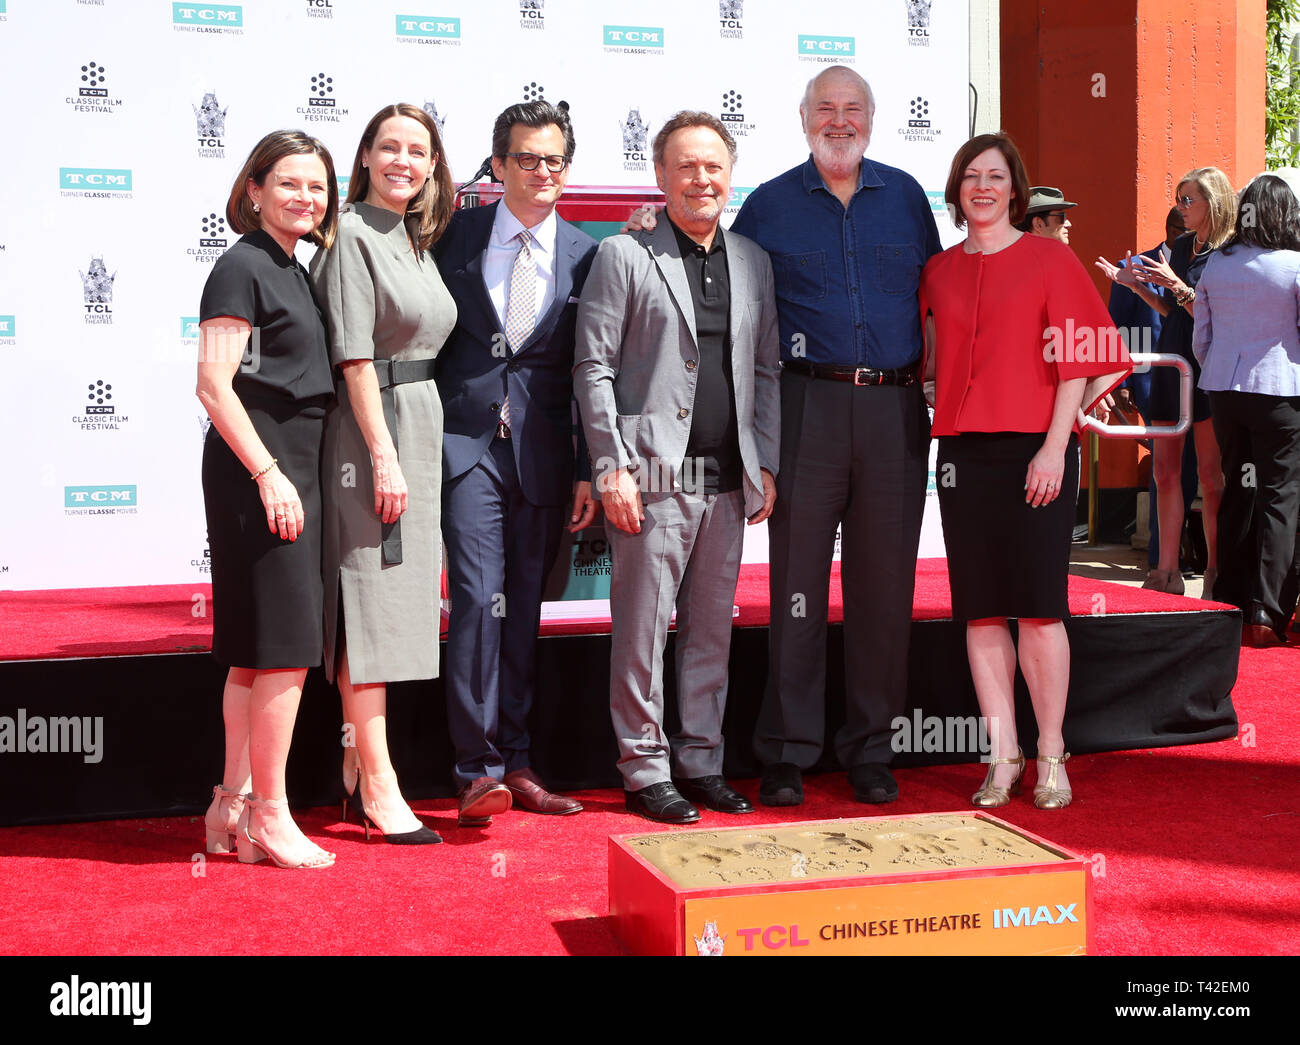 Hollywood, Ca. 12th Apr, 2019. Billy Crystal, Ben Mankiewicz, Rob Reiner, Jennifer Dorian, Charles Tabesh, Genevieve McGillicuddy, at 2019 10th Annual TCM Classic Film Festival - Hand and Footprint Ceremony: Billy Crystal at the TCL Chinese Theatre IMAX on April 12, 2019. Credit: Faye Sadou/Media Punch/Alamy Live News Stock Photo